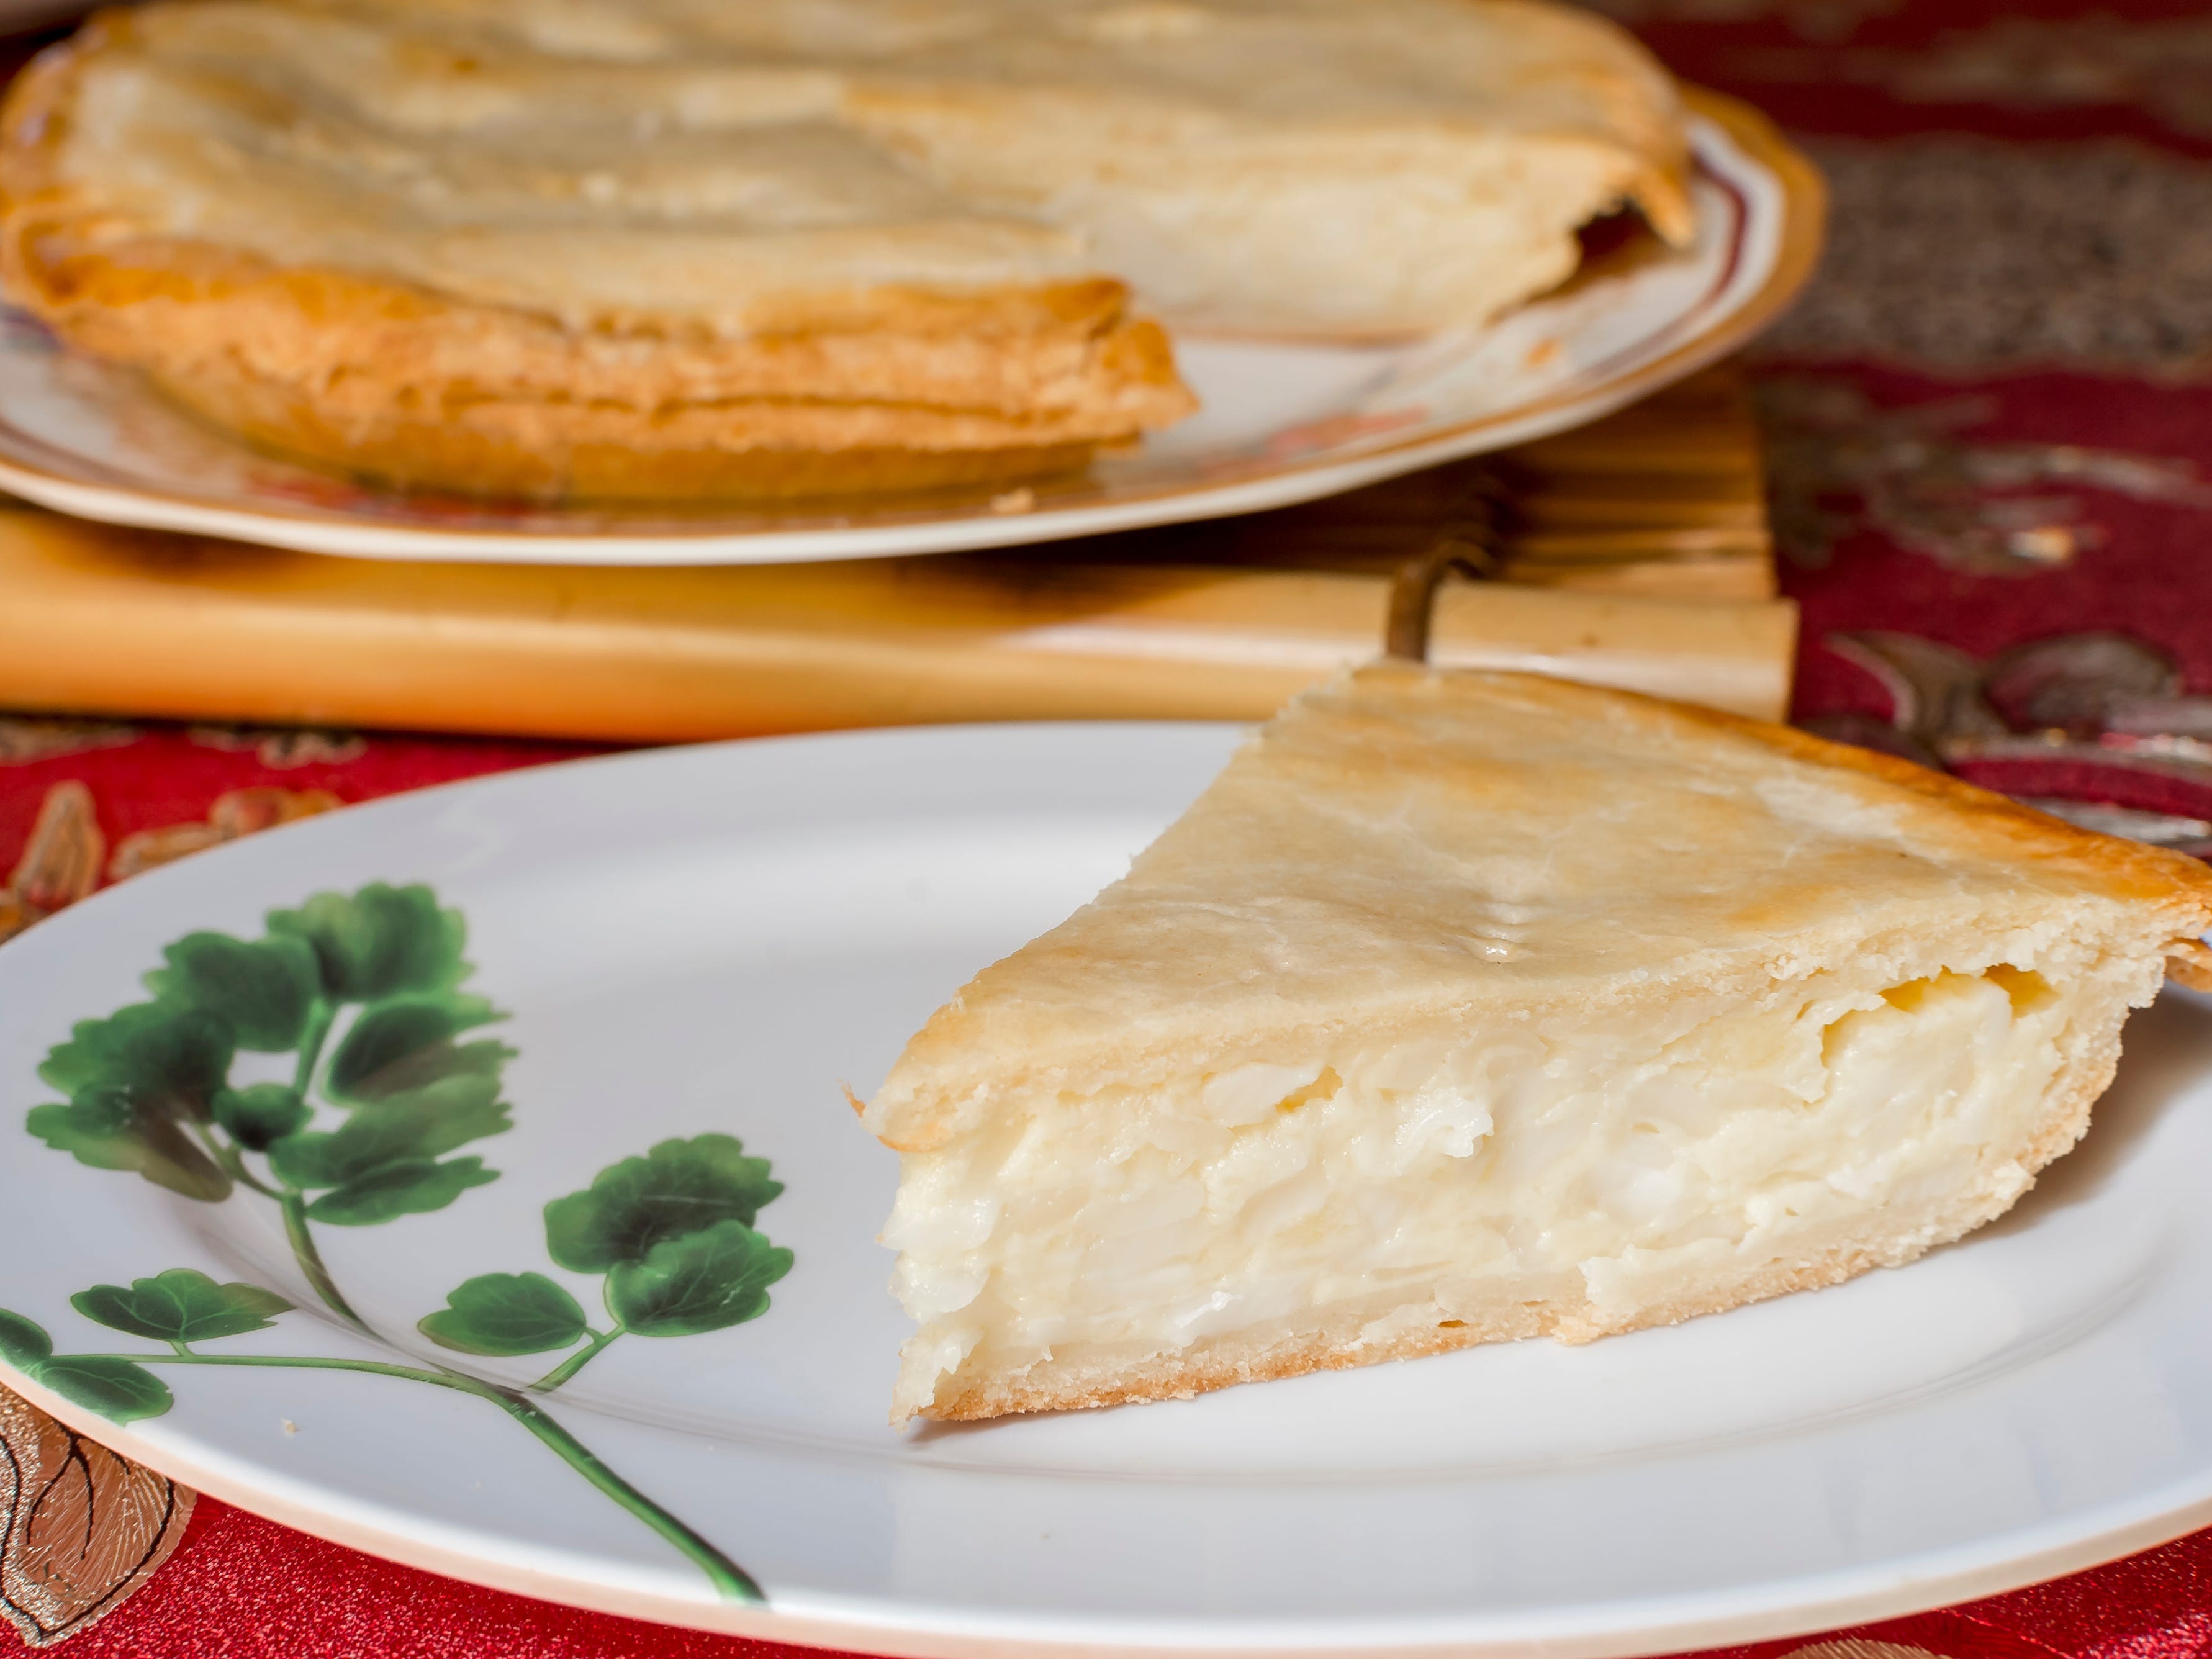 <p><a href="https://www.cnn.com/travel/article/best-dishes-taste-of-manila-parts-unknown/index.html">According to CNN,</a> Buko pie originated from Laguna.</p><p>It is traditionally made of young coconut meat and sweetened condensed milk, encased in a crisp, crumbly crust.</p>